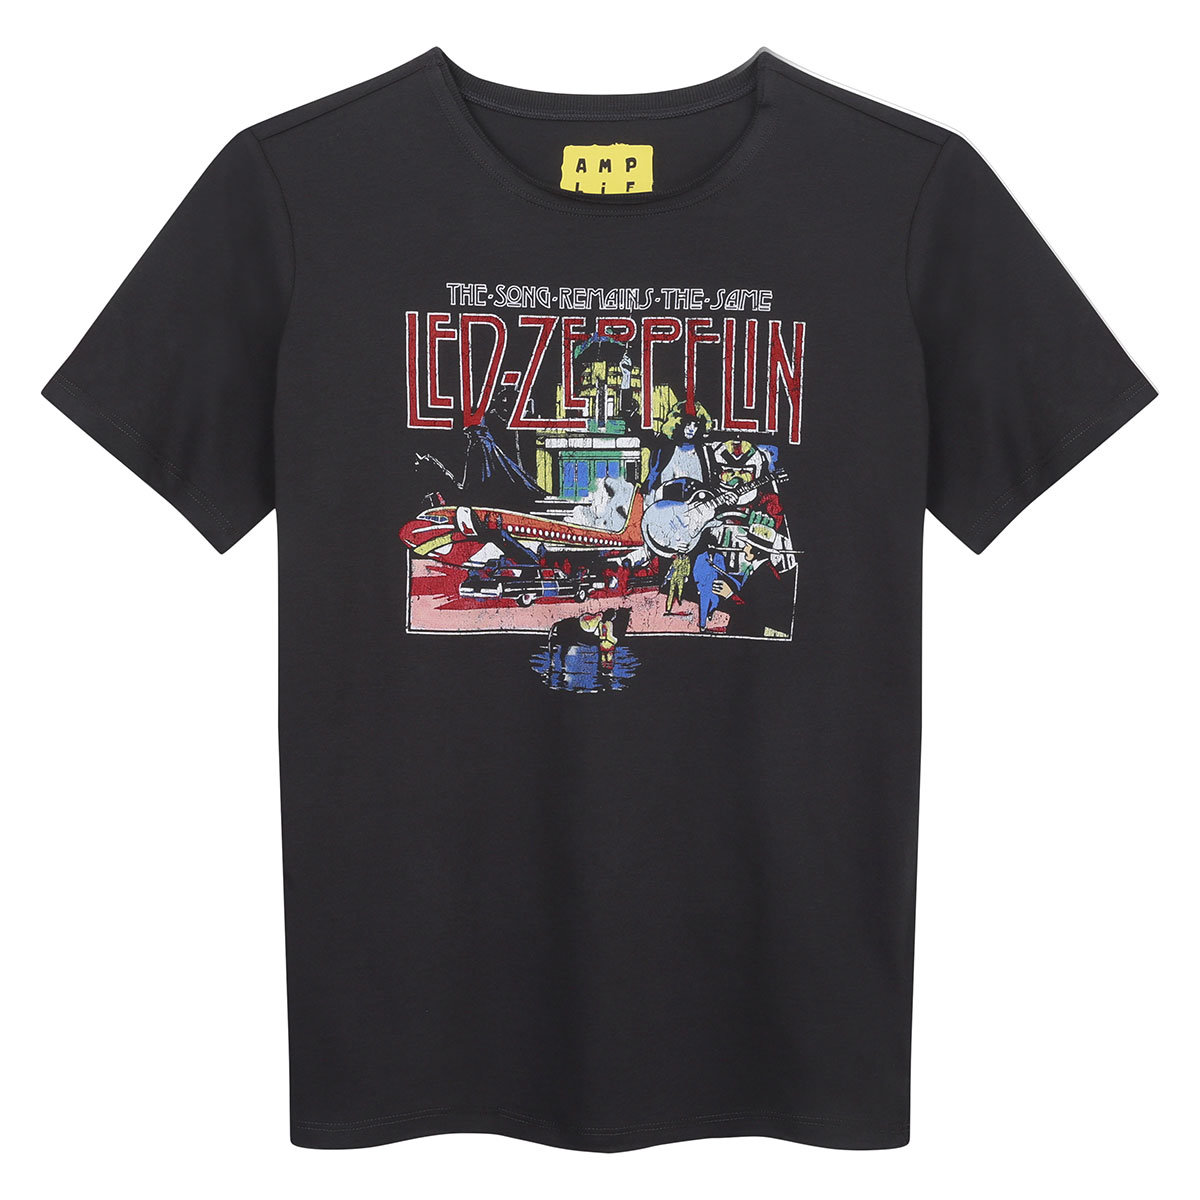 Led Zeppelin The Song Remains The Same Kids Tee